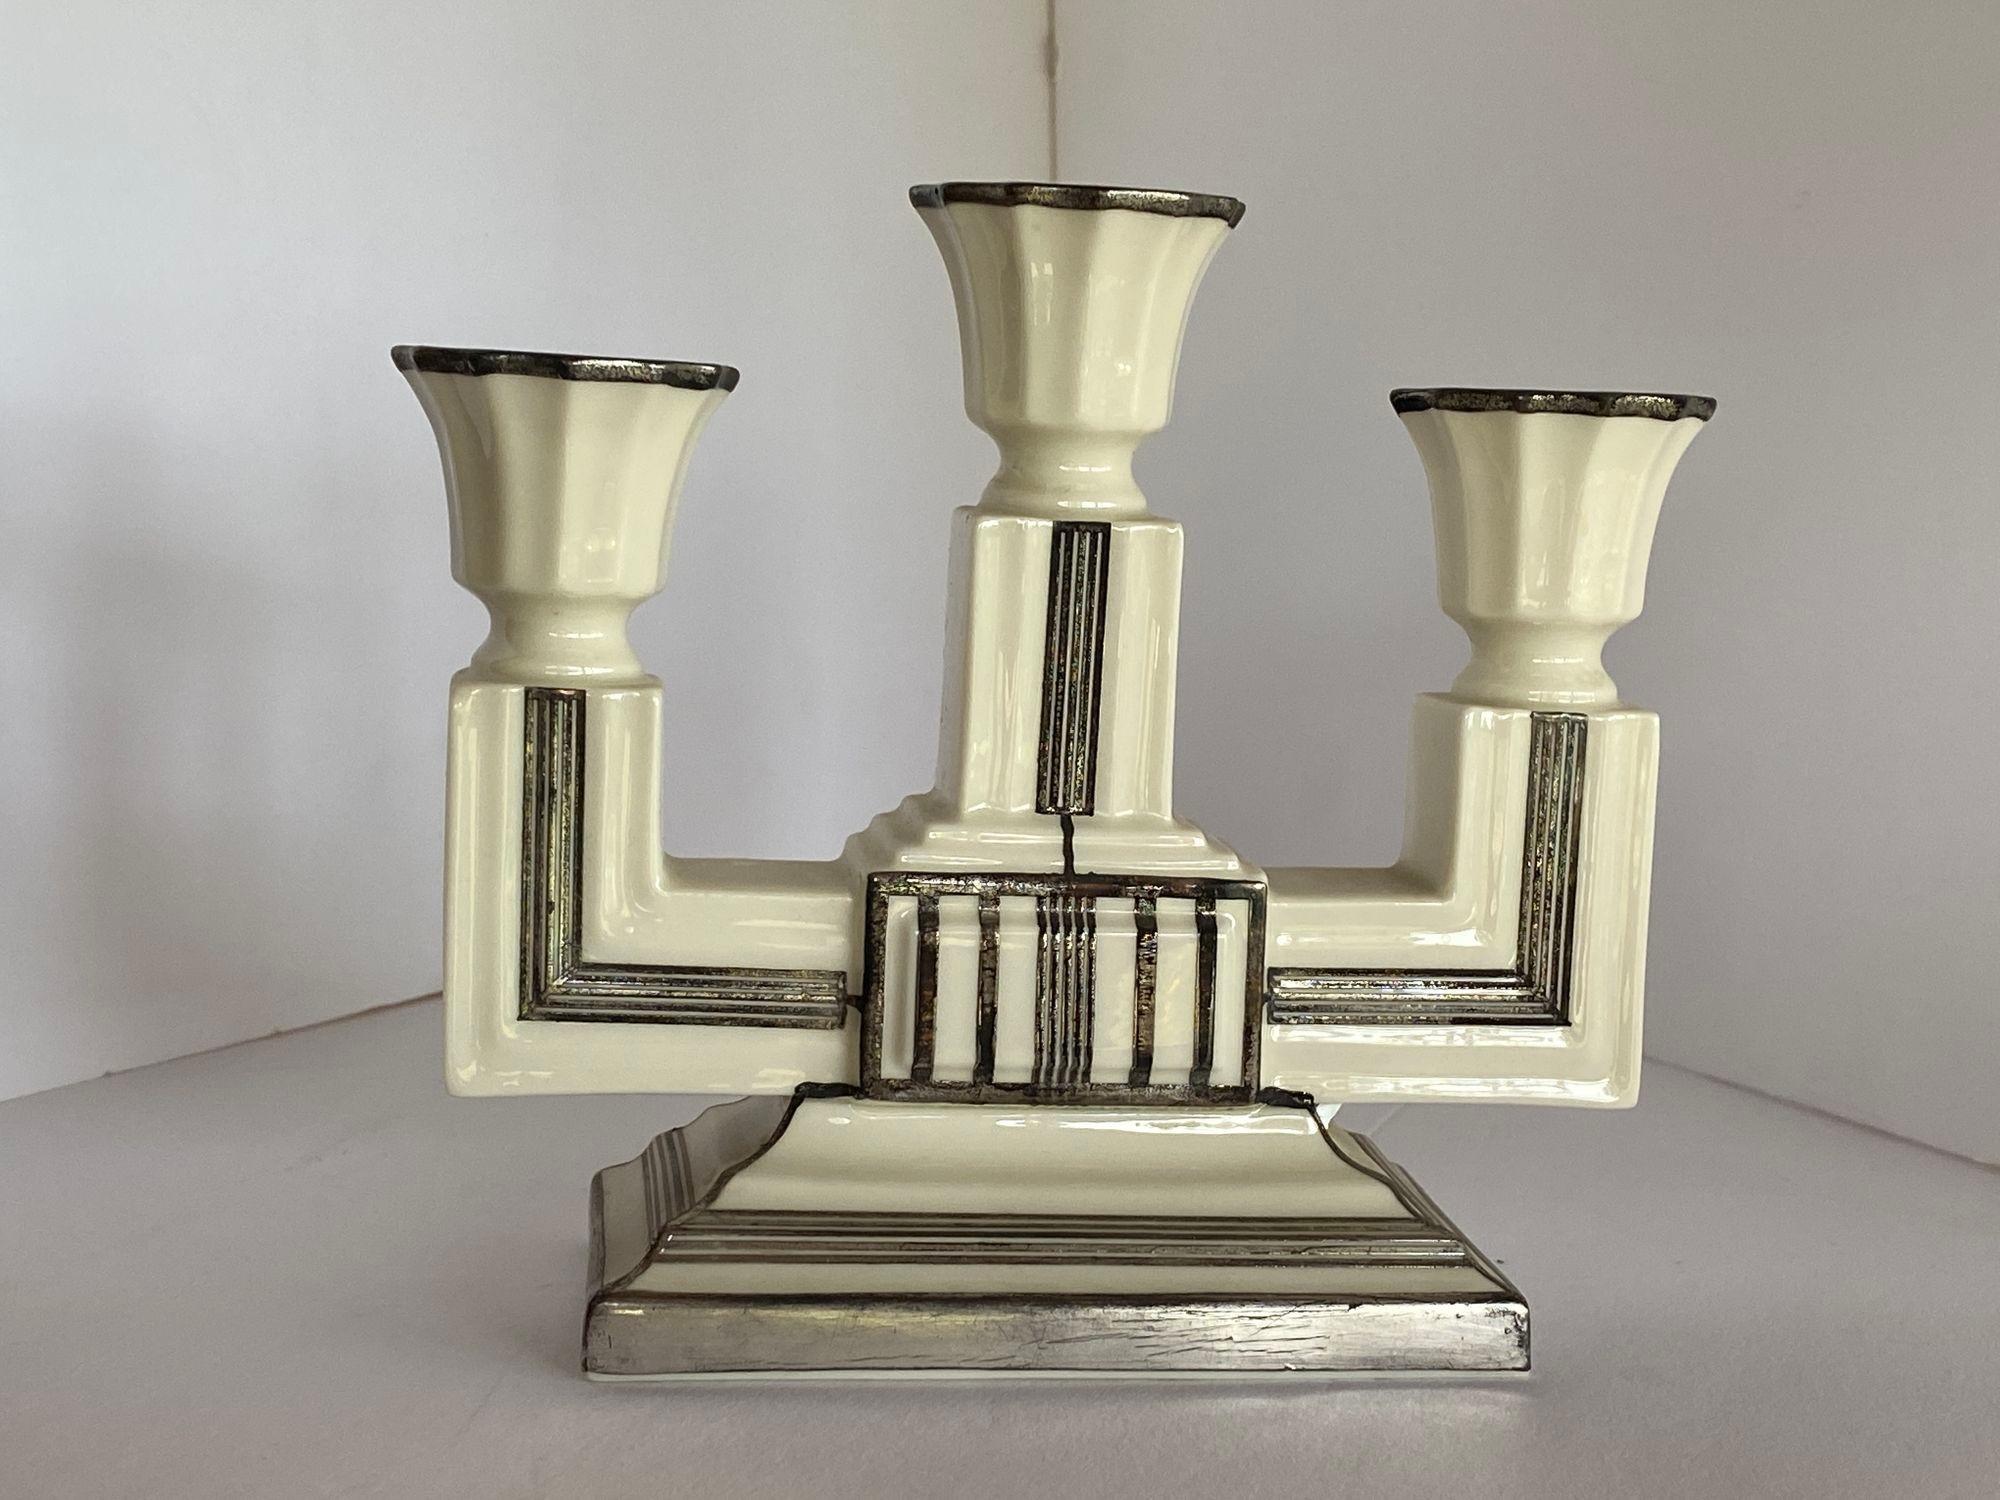 Stepped Art Deco Candelabra with Sterling Silver Overlay by Lenox In Excellent Condition For Sale In Van Nuys, CA